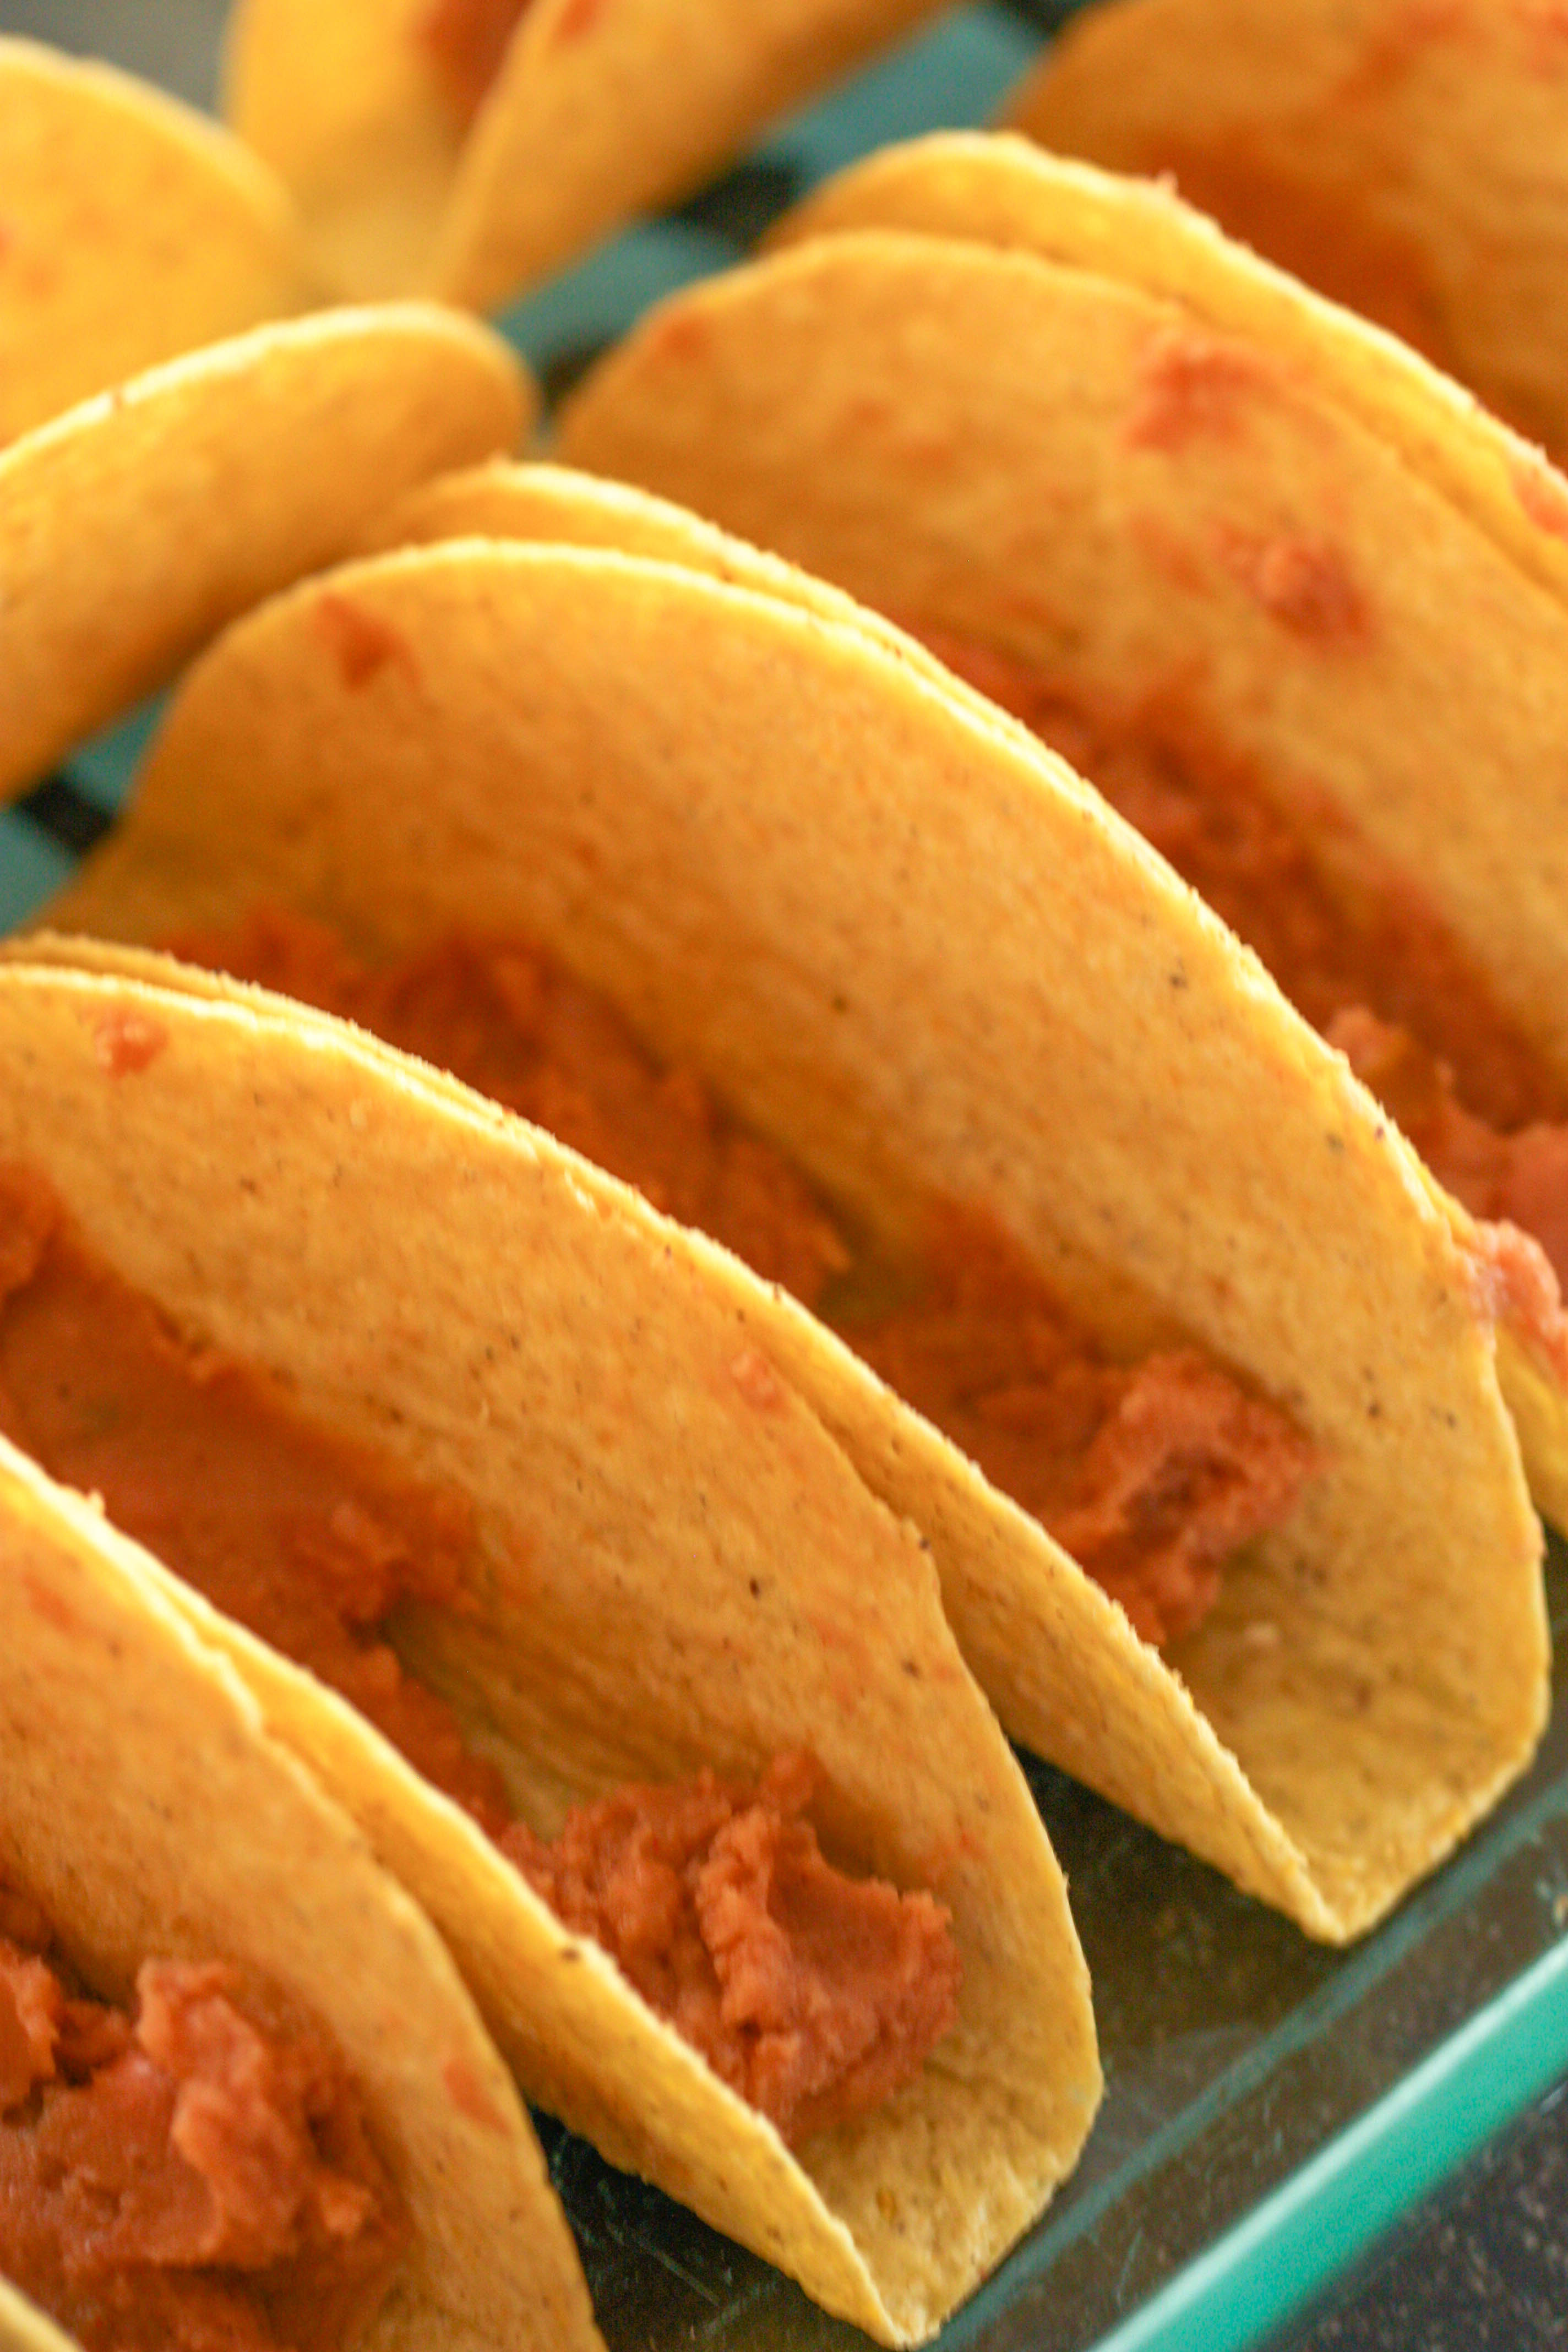 Refried beans in hard taco shells